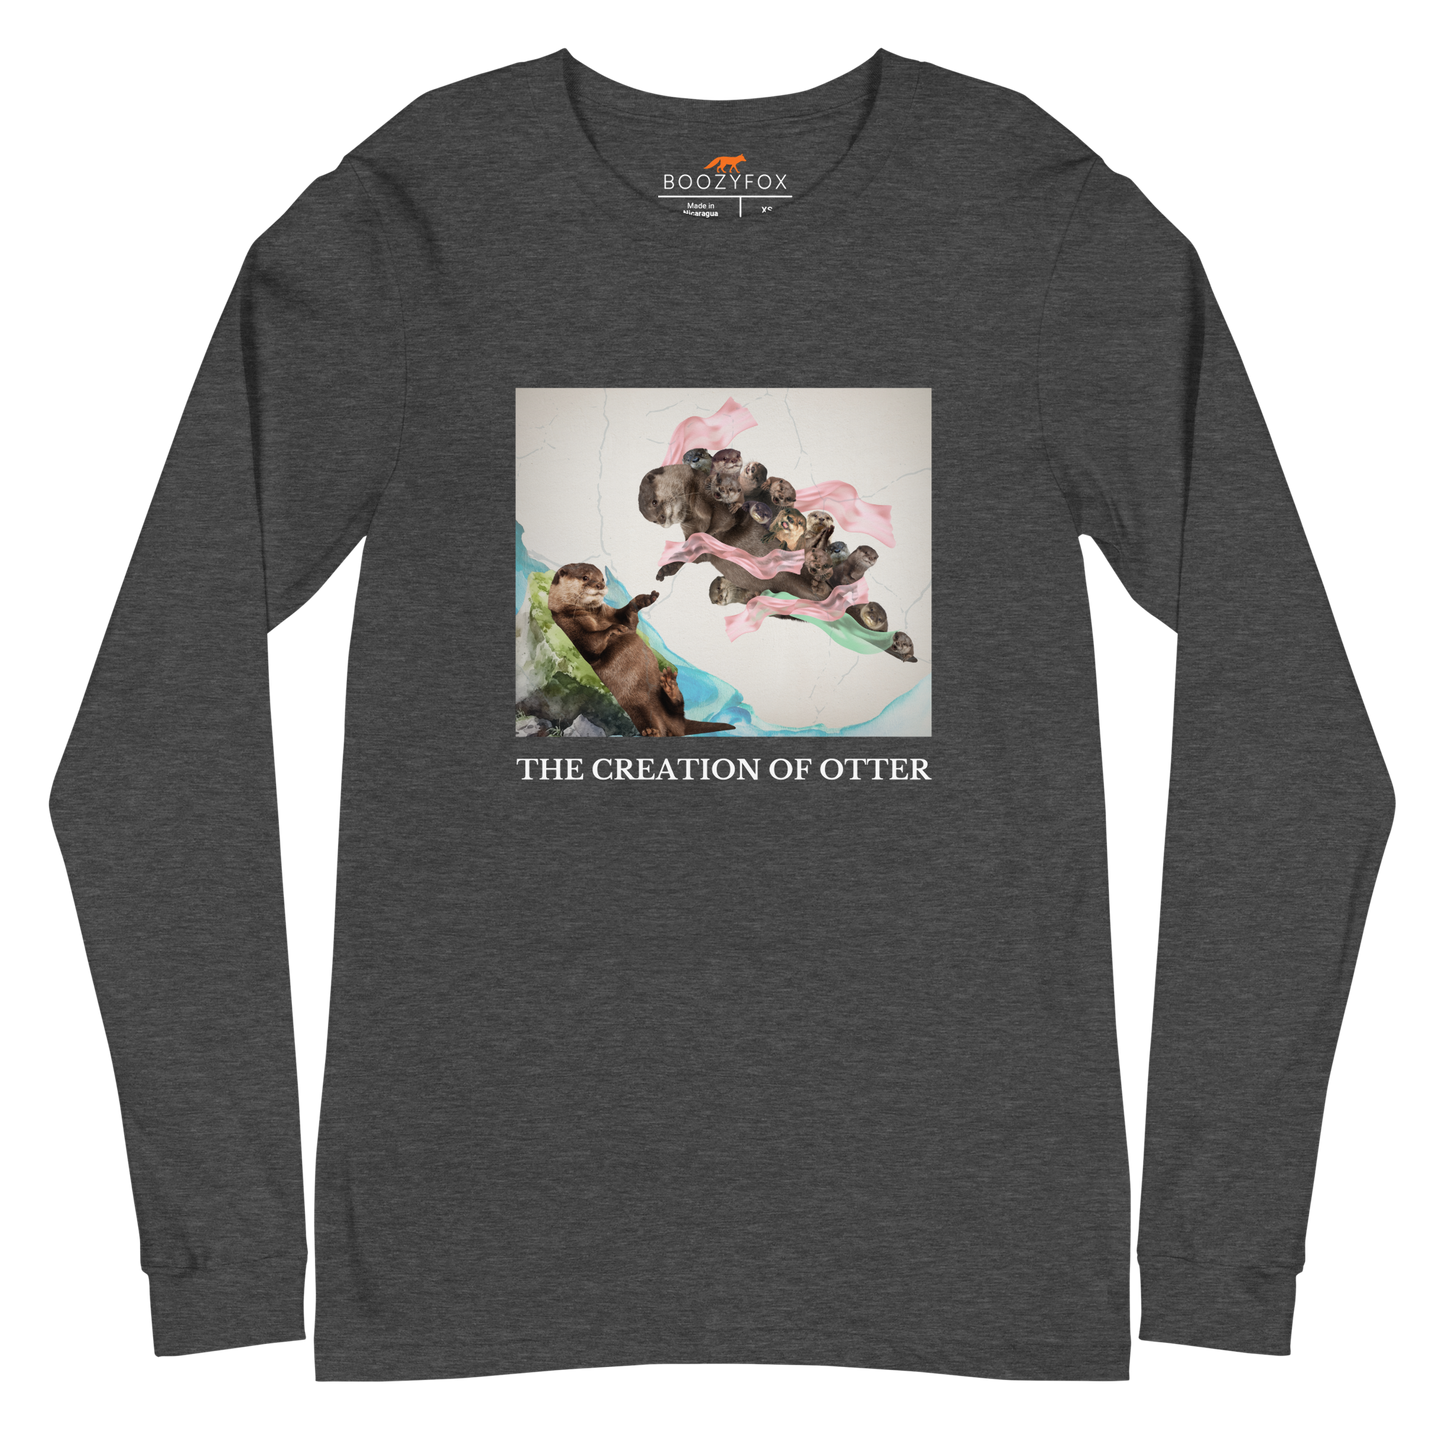 Dark Grey Heather Otter Long Sleeve Tee featuring a playful The Creation of Otter parody of Michelangelo's masterpiece - Artsy/Funny Otter Long Sleeve Graphic Tees - Boozy Fox